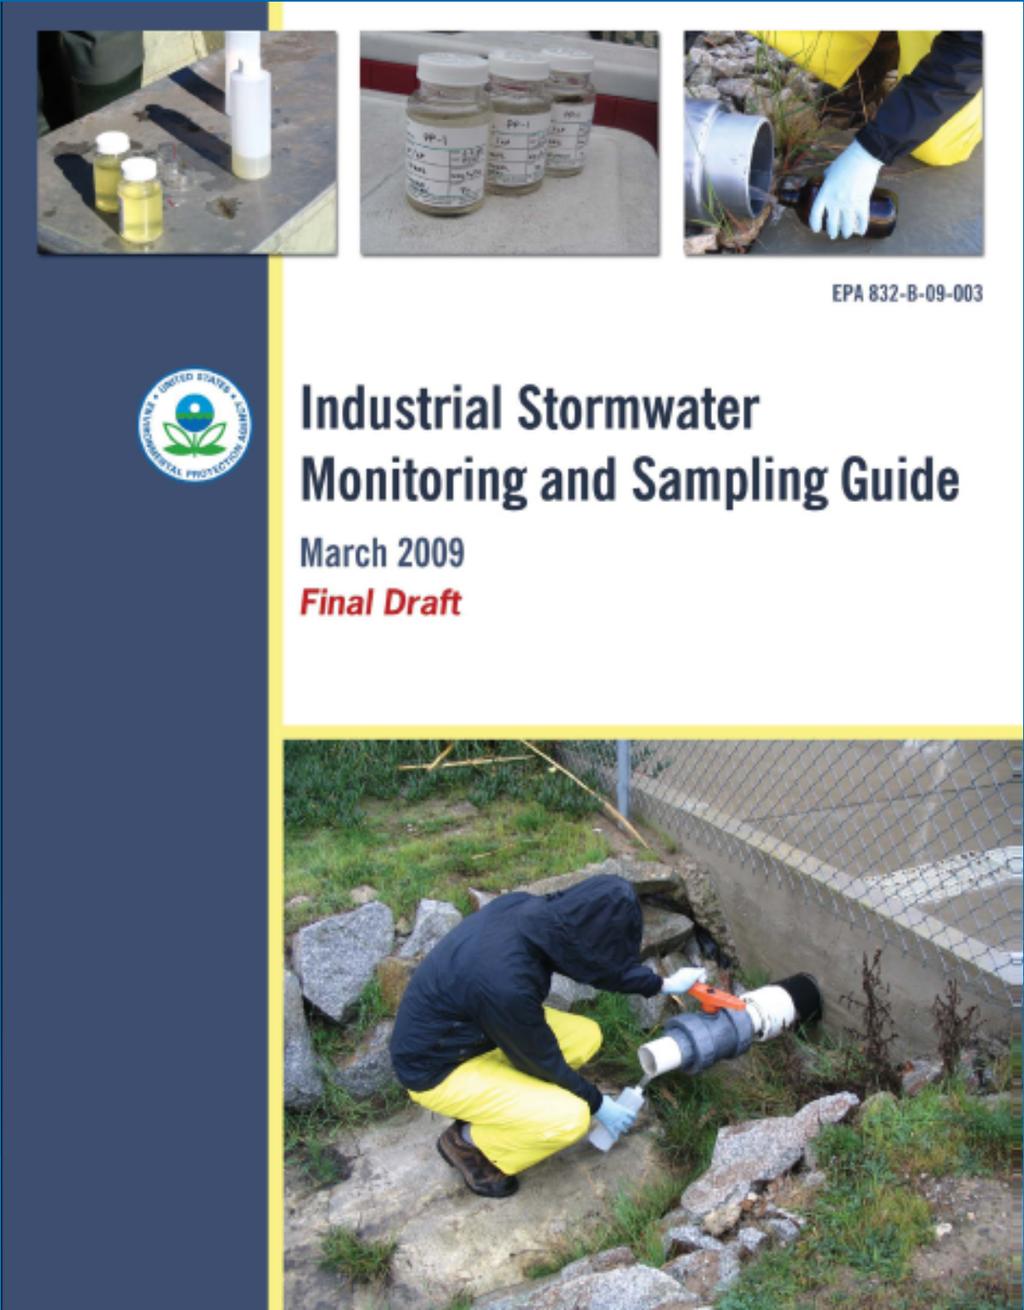 EPA monitoring guidance available at: www.